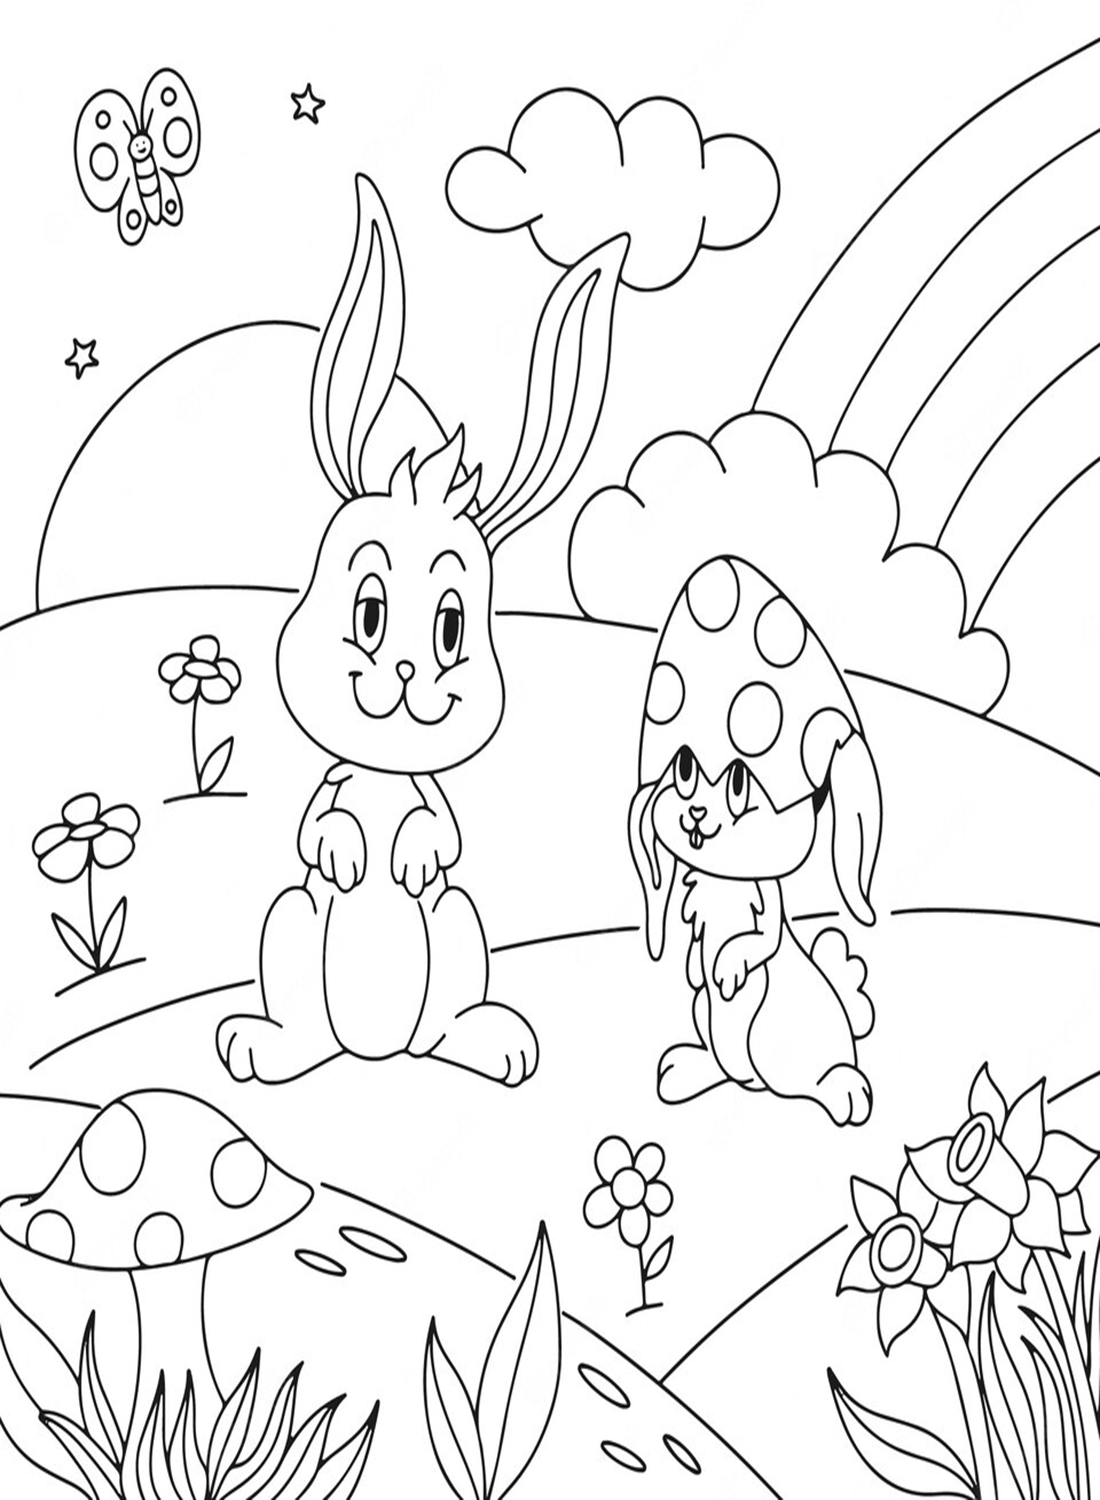 Rabbit And Friend from Rabbit